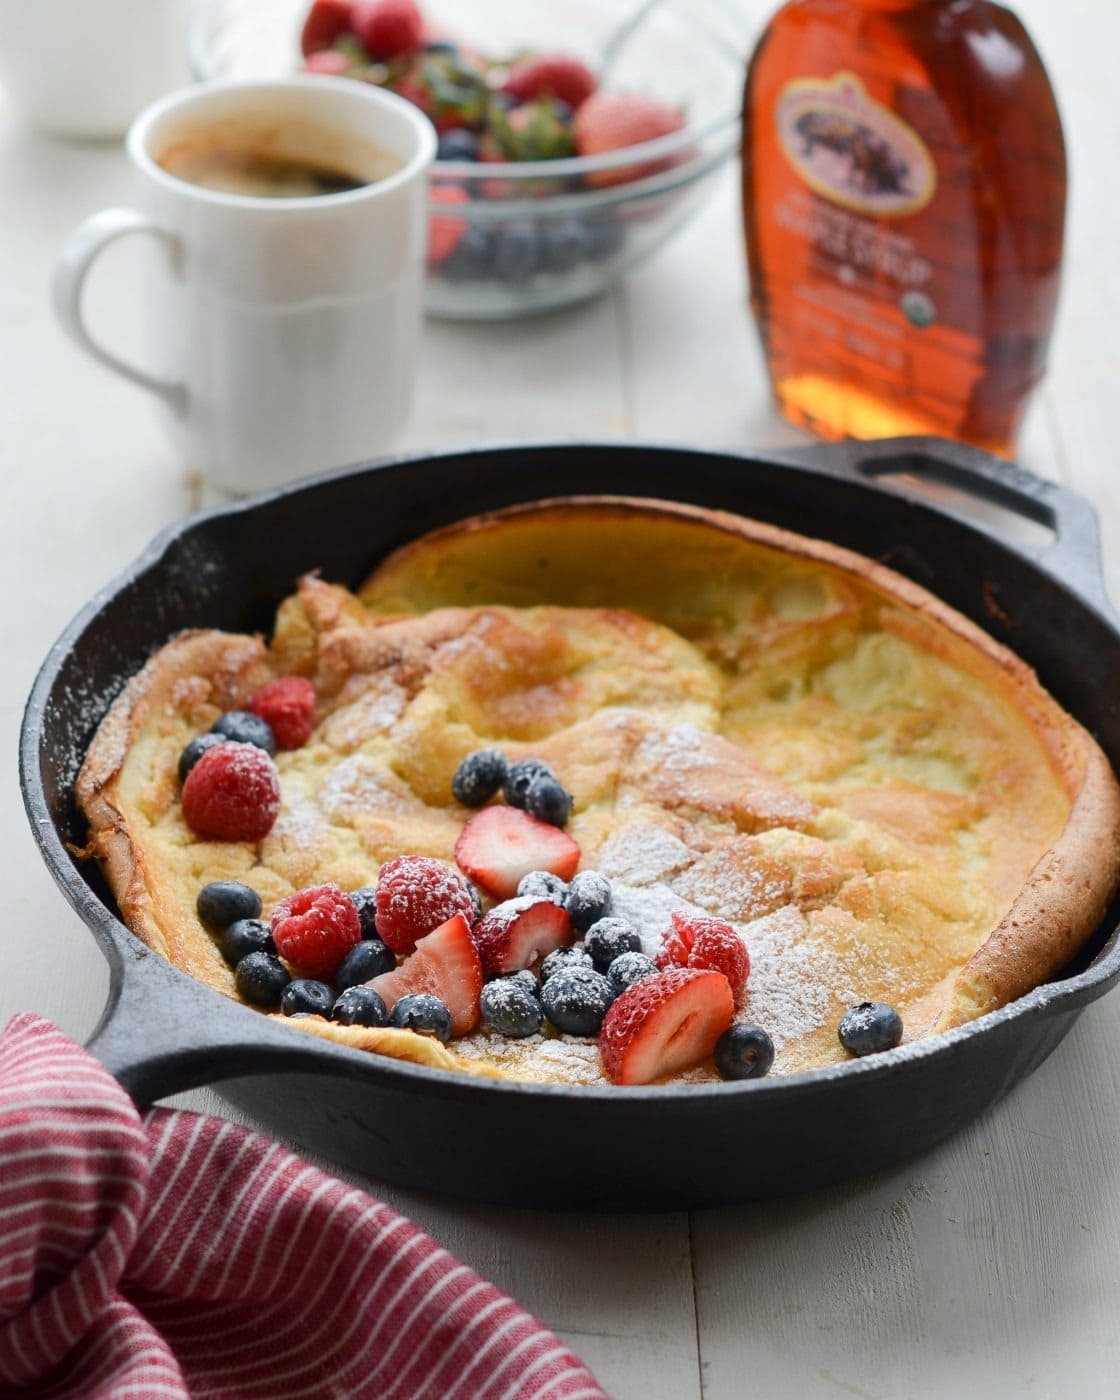 Puffy pancake baked in a sizzling-hot buttered skillet with fresh blueberries, raspberries and strawberries on top